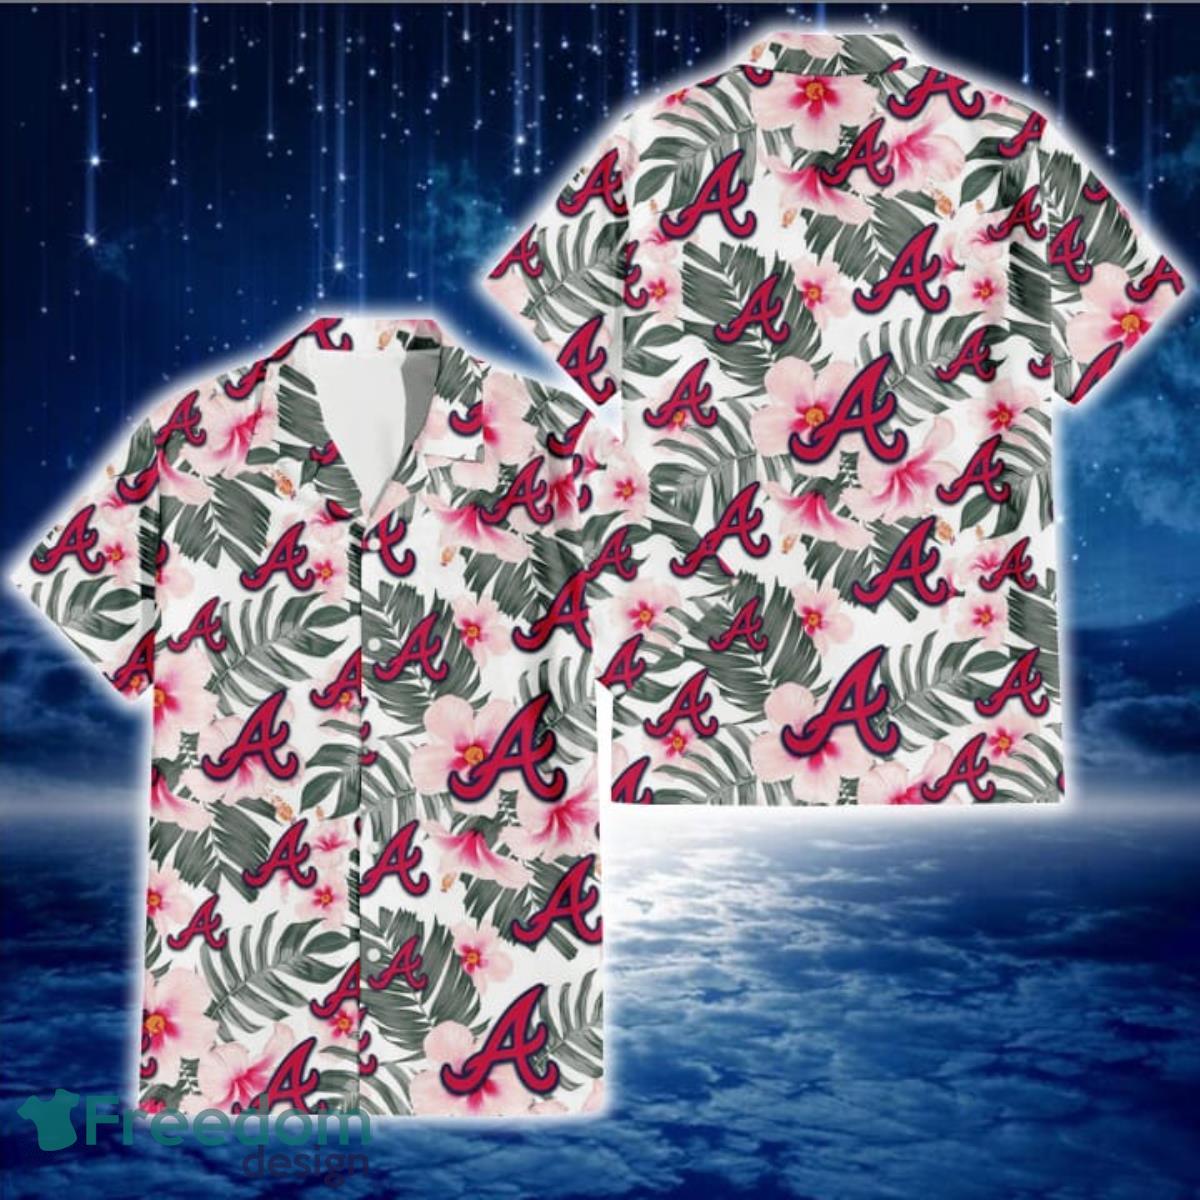 Atlanta Braves Logo And Green Leaf Pattern All Over Print Hawaiian Shirt  For Fans - Freedomdesign